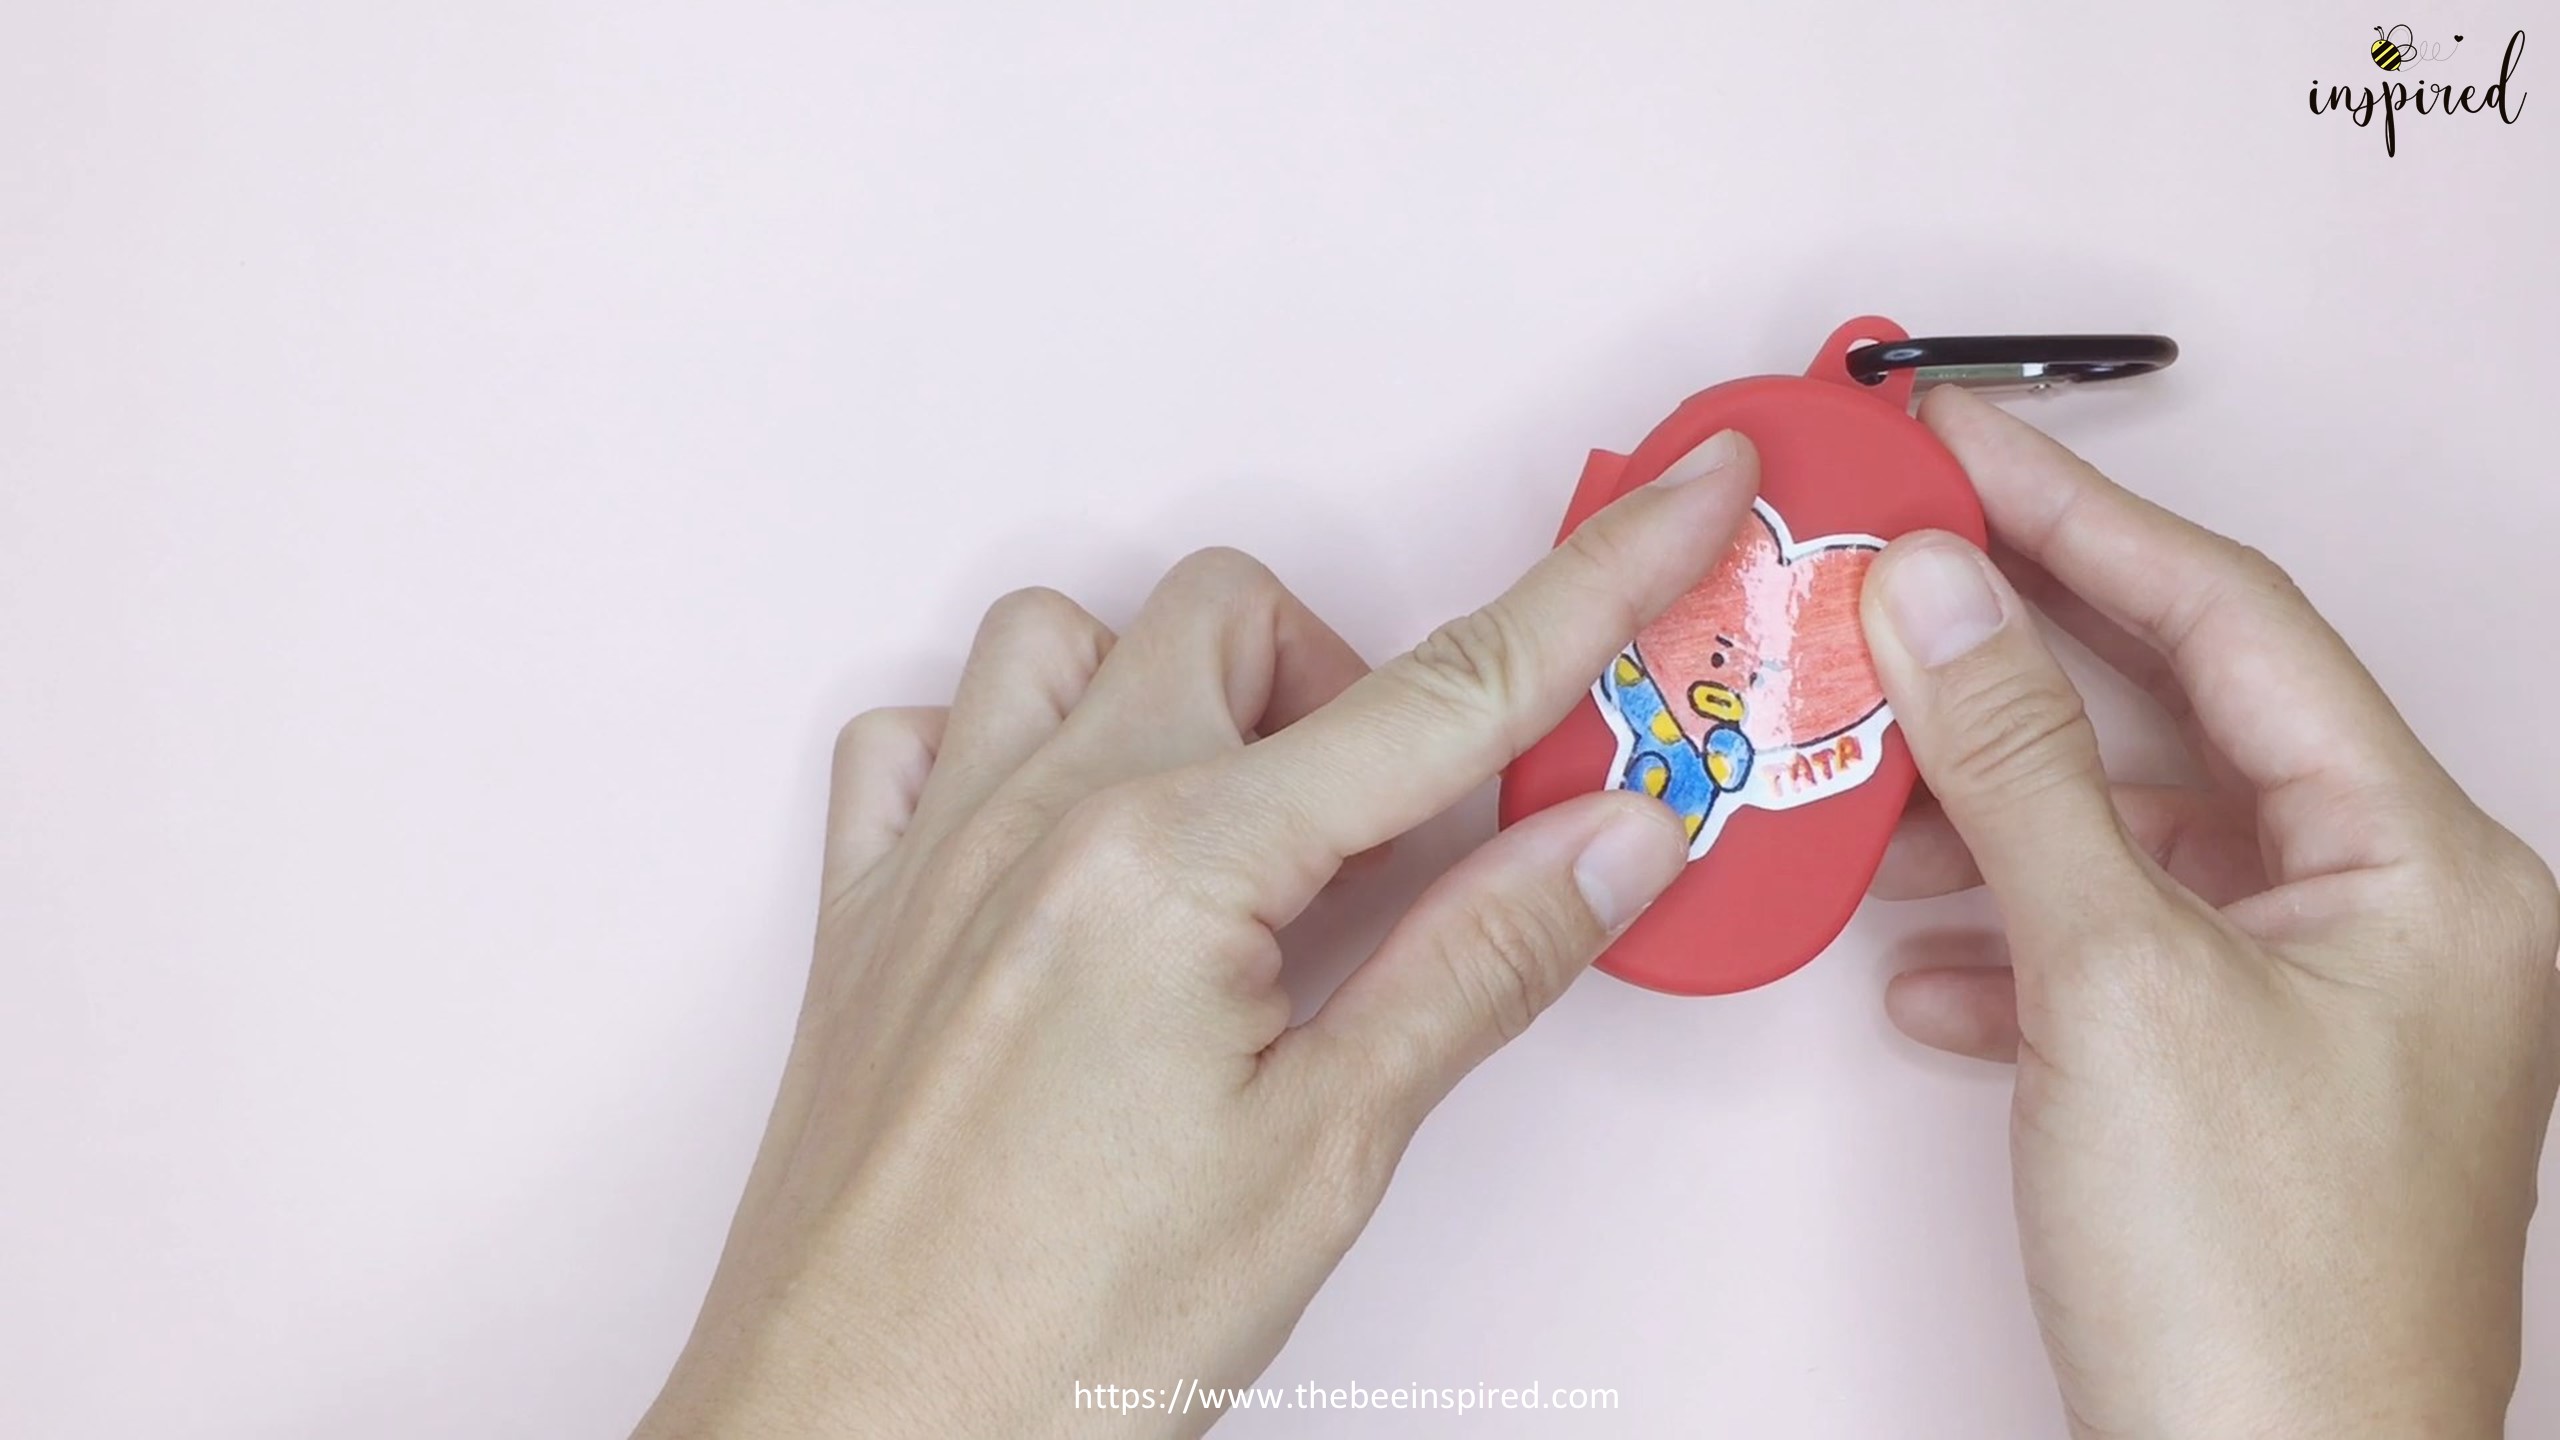 How to Make BTS Sticker from My Drawing without Sticker Paper_17